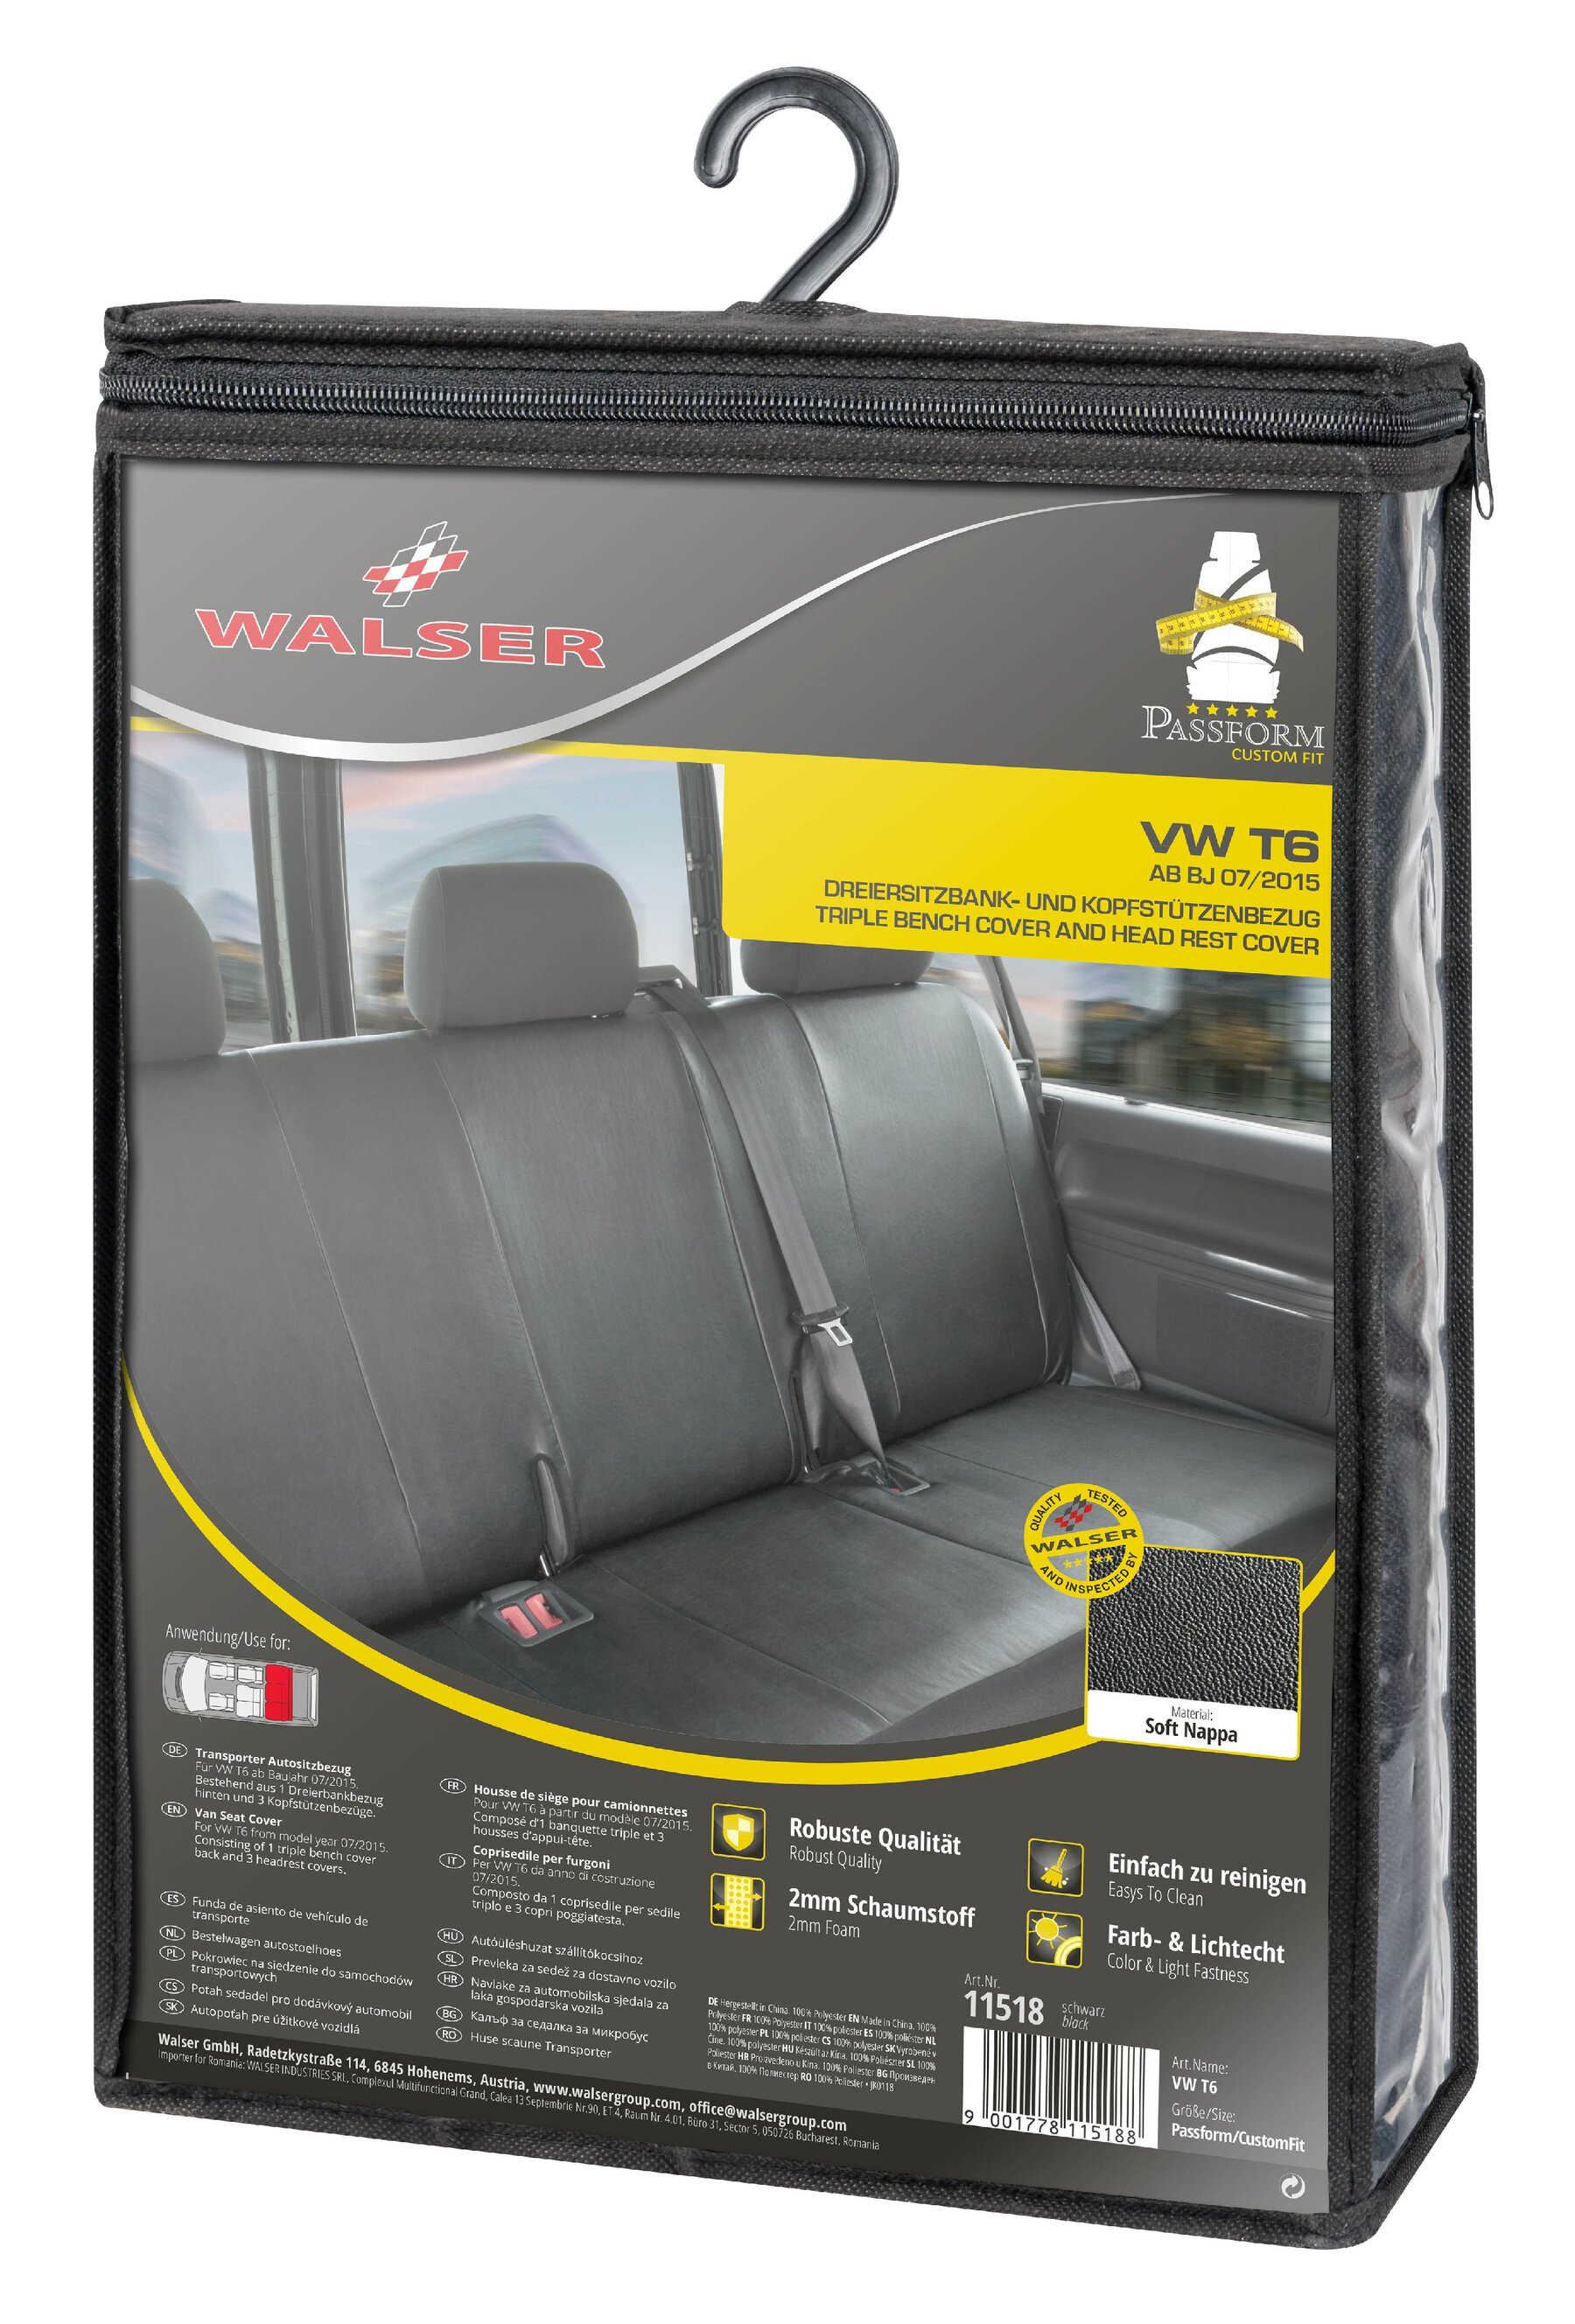 Seat cover made of imitation leather for VW T6, 3-seater bench cover